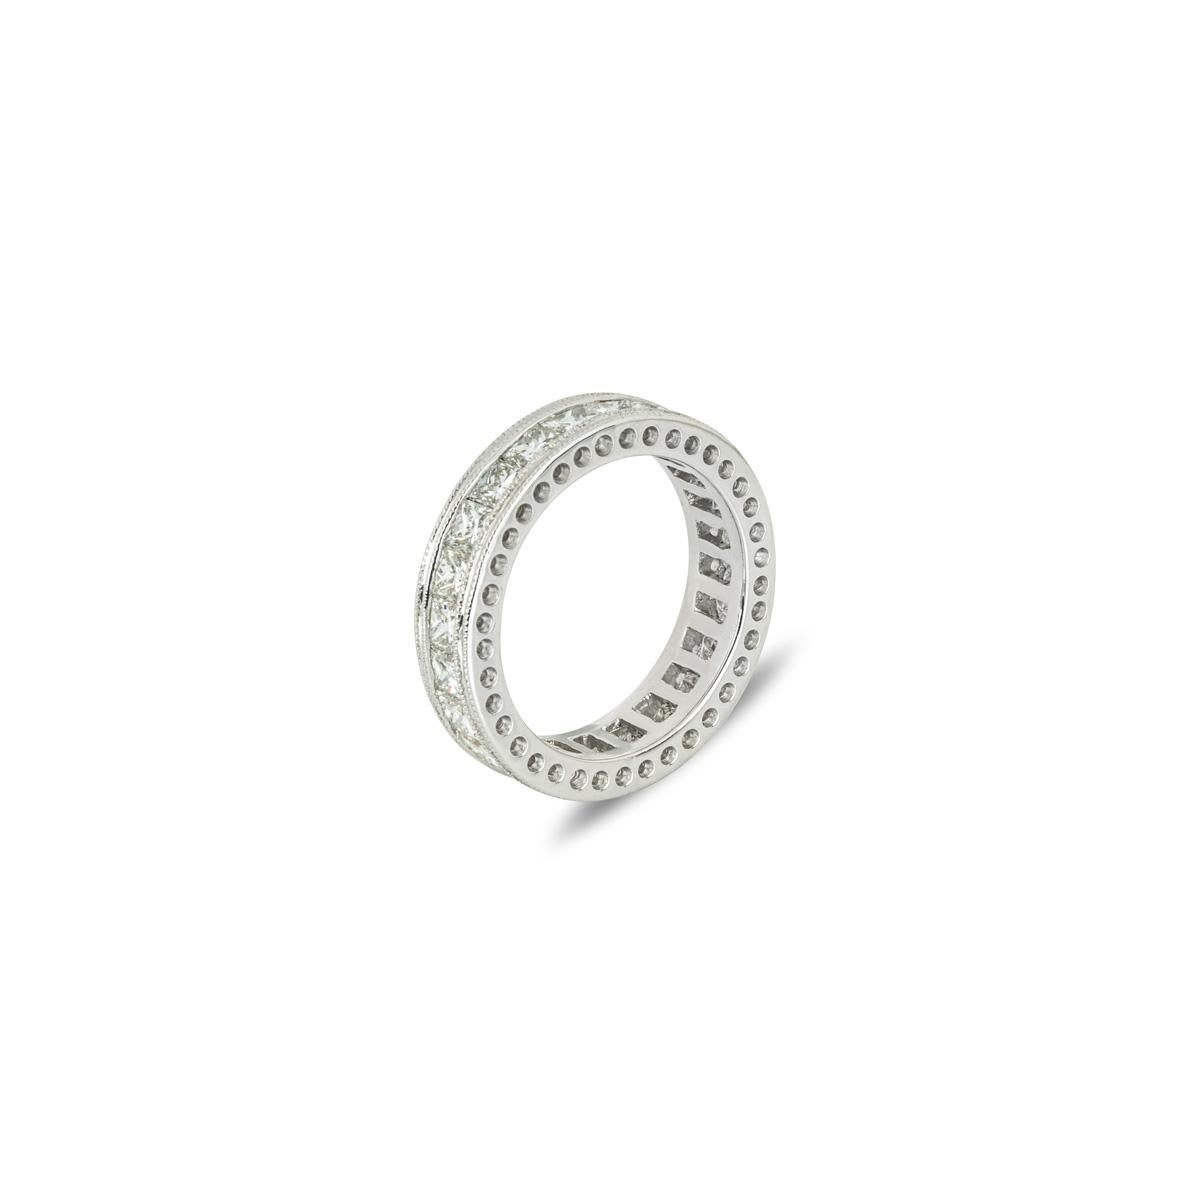 A beautiful 18k white gold diamond full eternity ring. The ring is channel set within a milgrain border, with 22 princess cut diamonds with an approximate total weight of 2.00ct, G-H colour and VS clarity. The 5mm wide band is a UK size L½/ US size